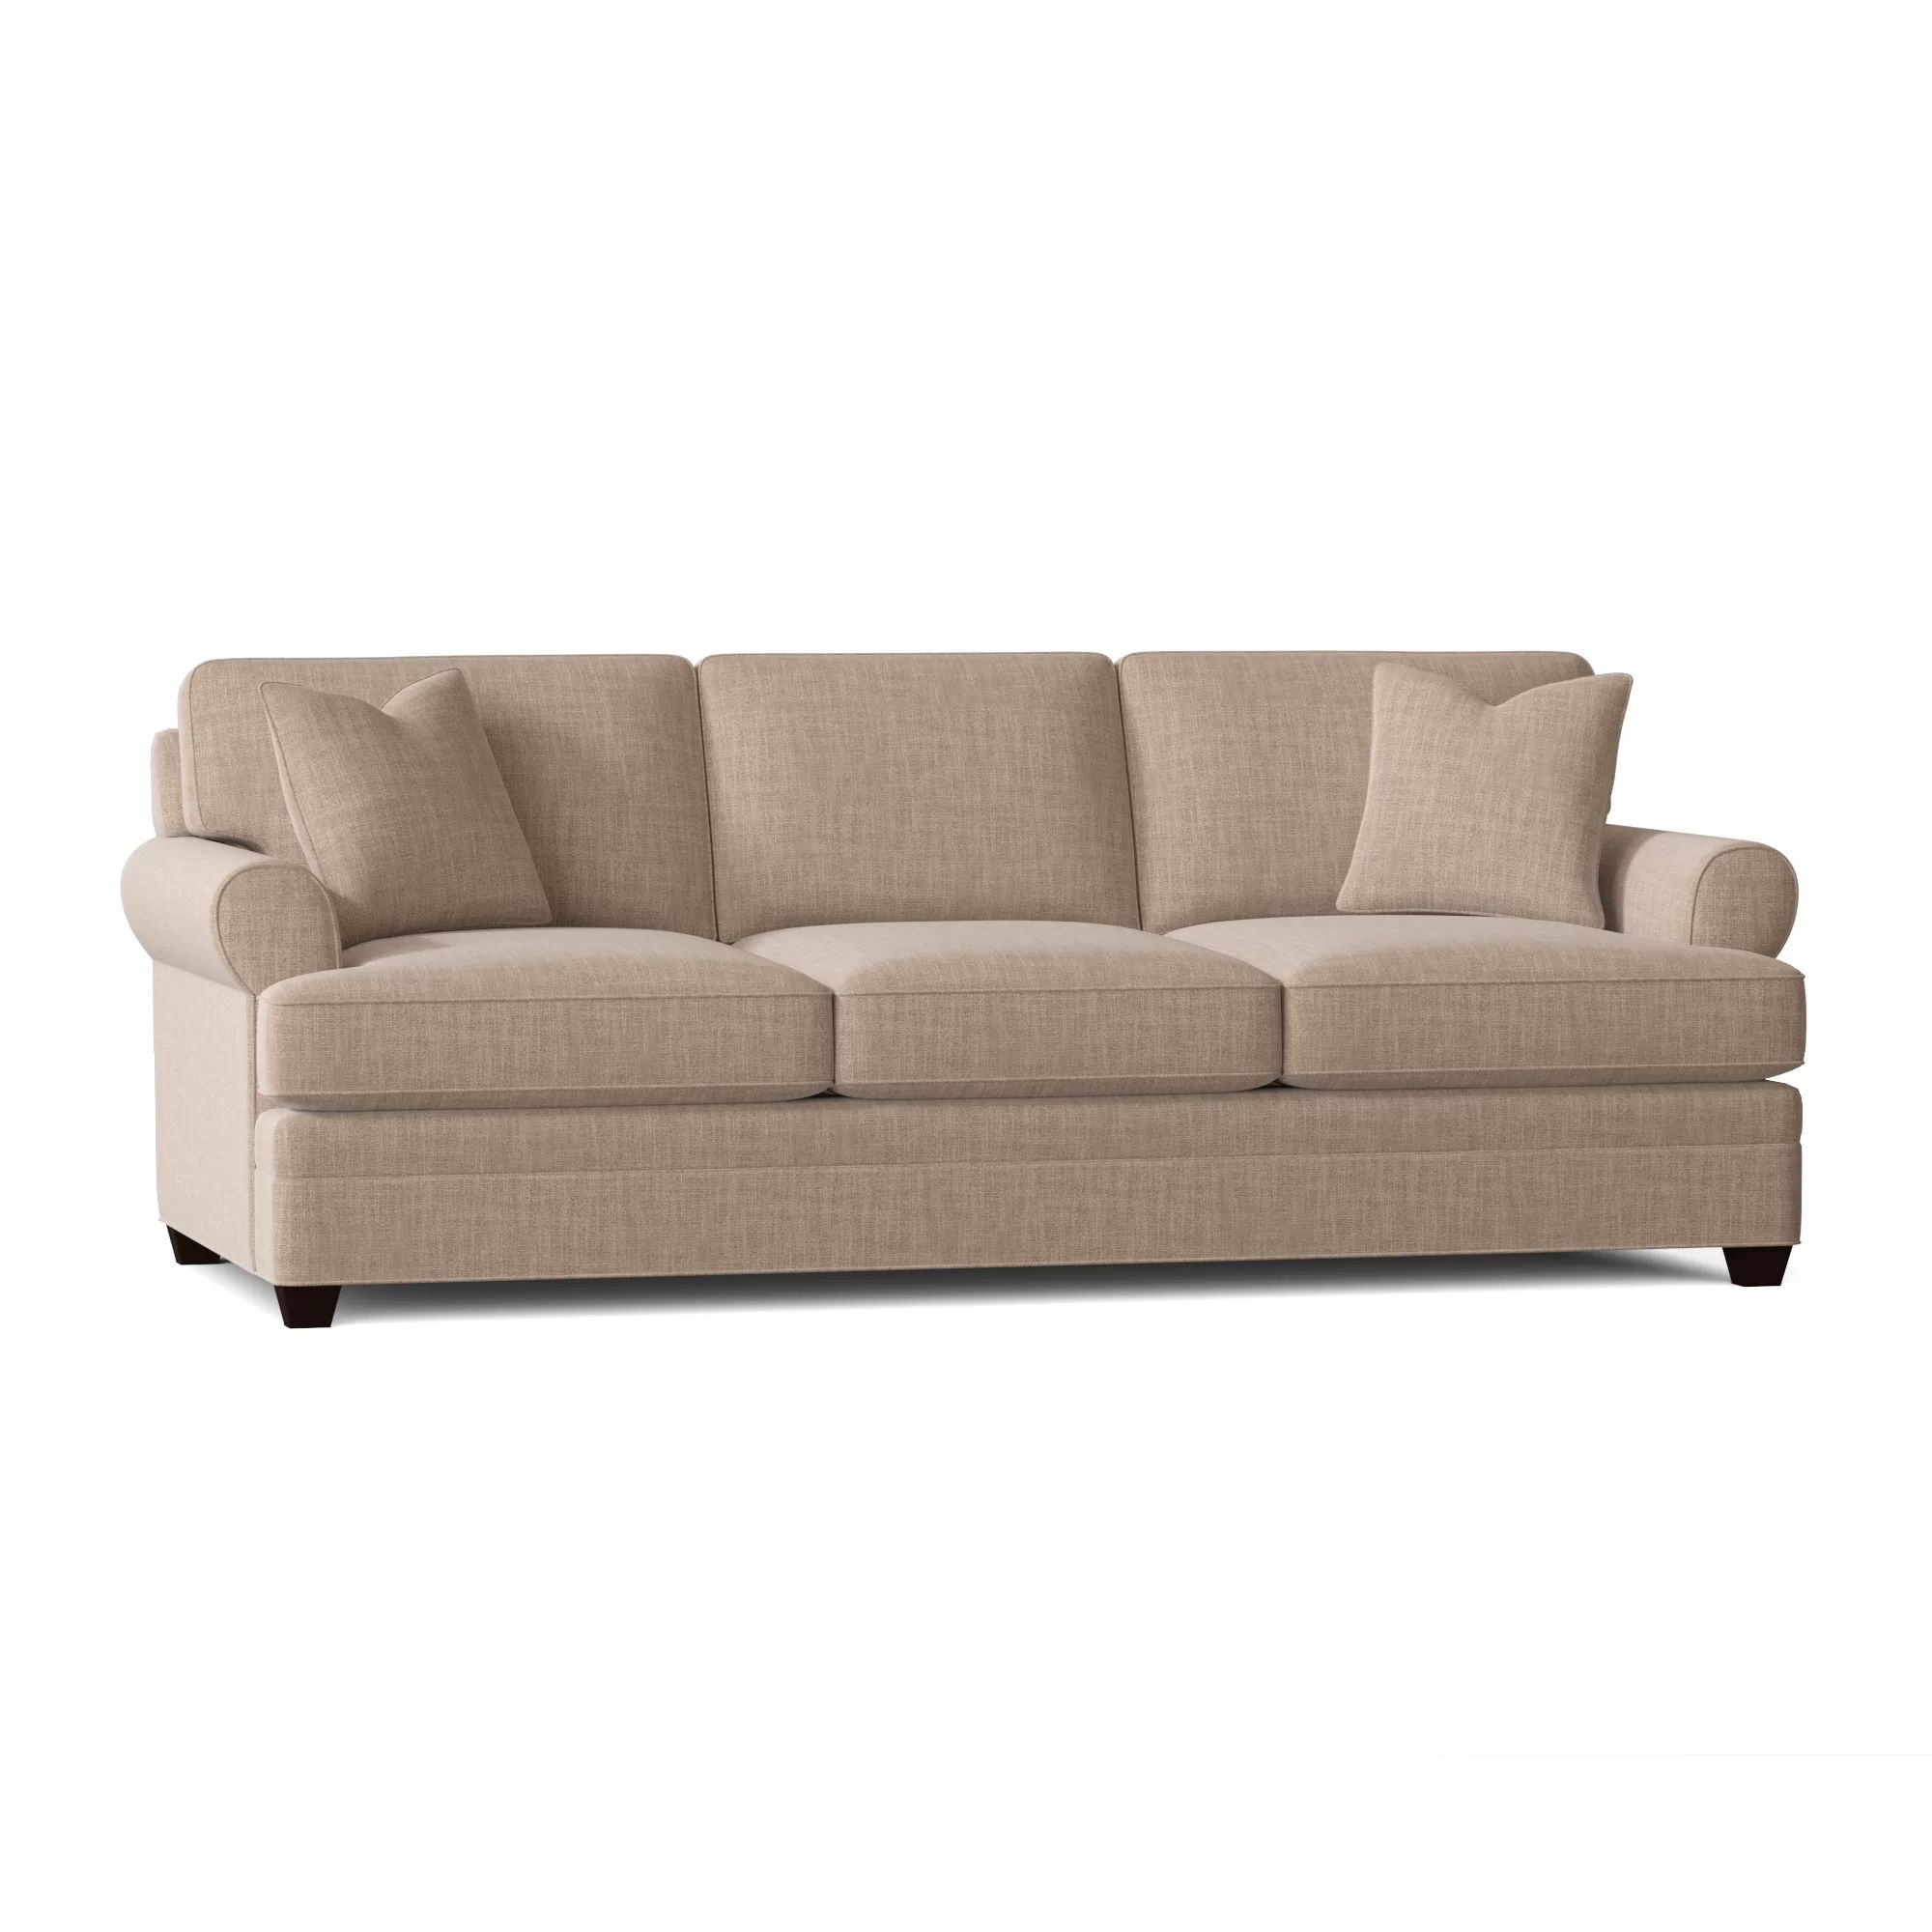 Romeo 91'' Rolled Arm Sofa with Reversible Cushions | Wayfair Professional